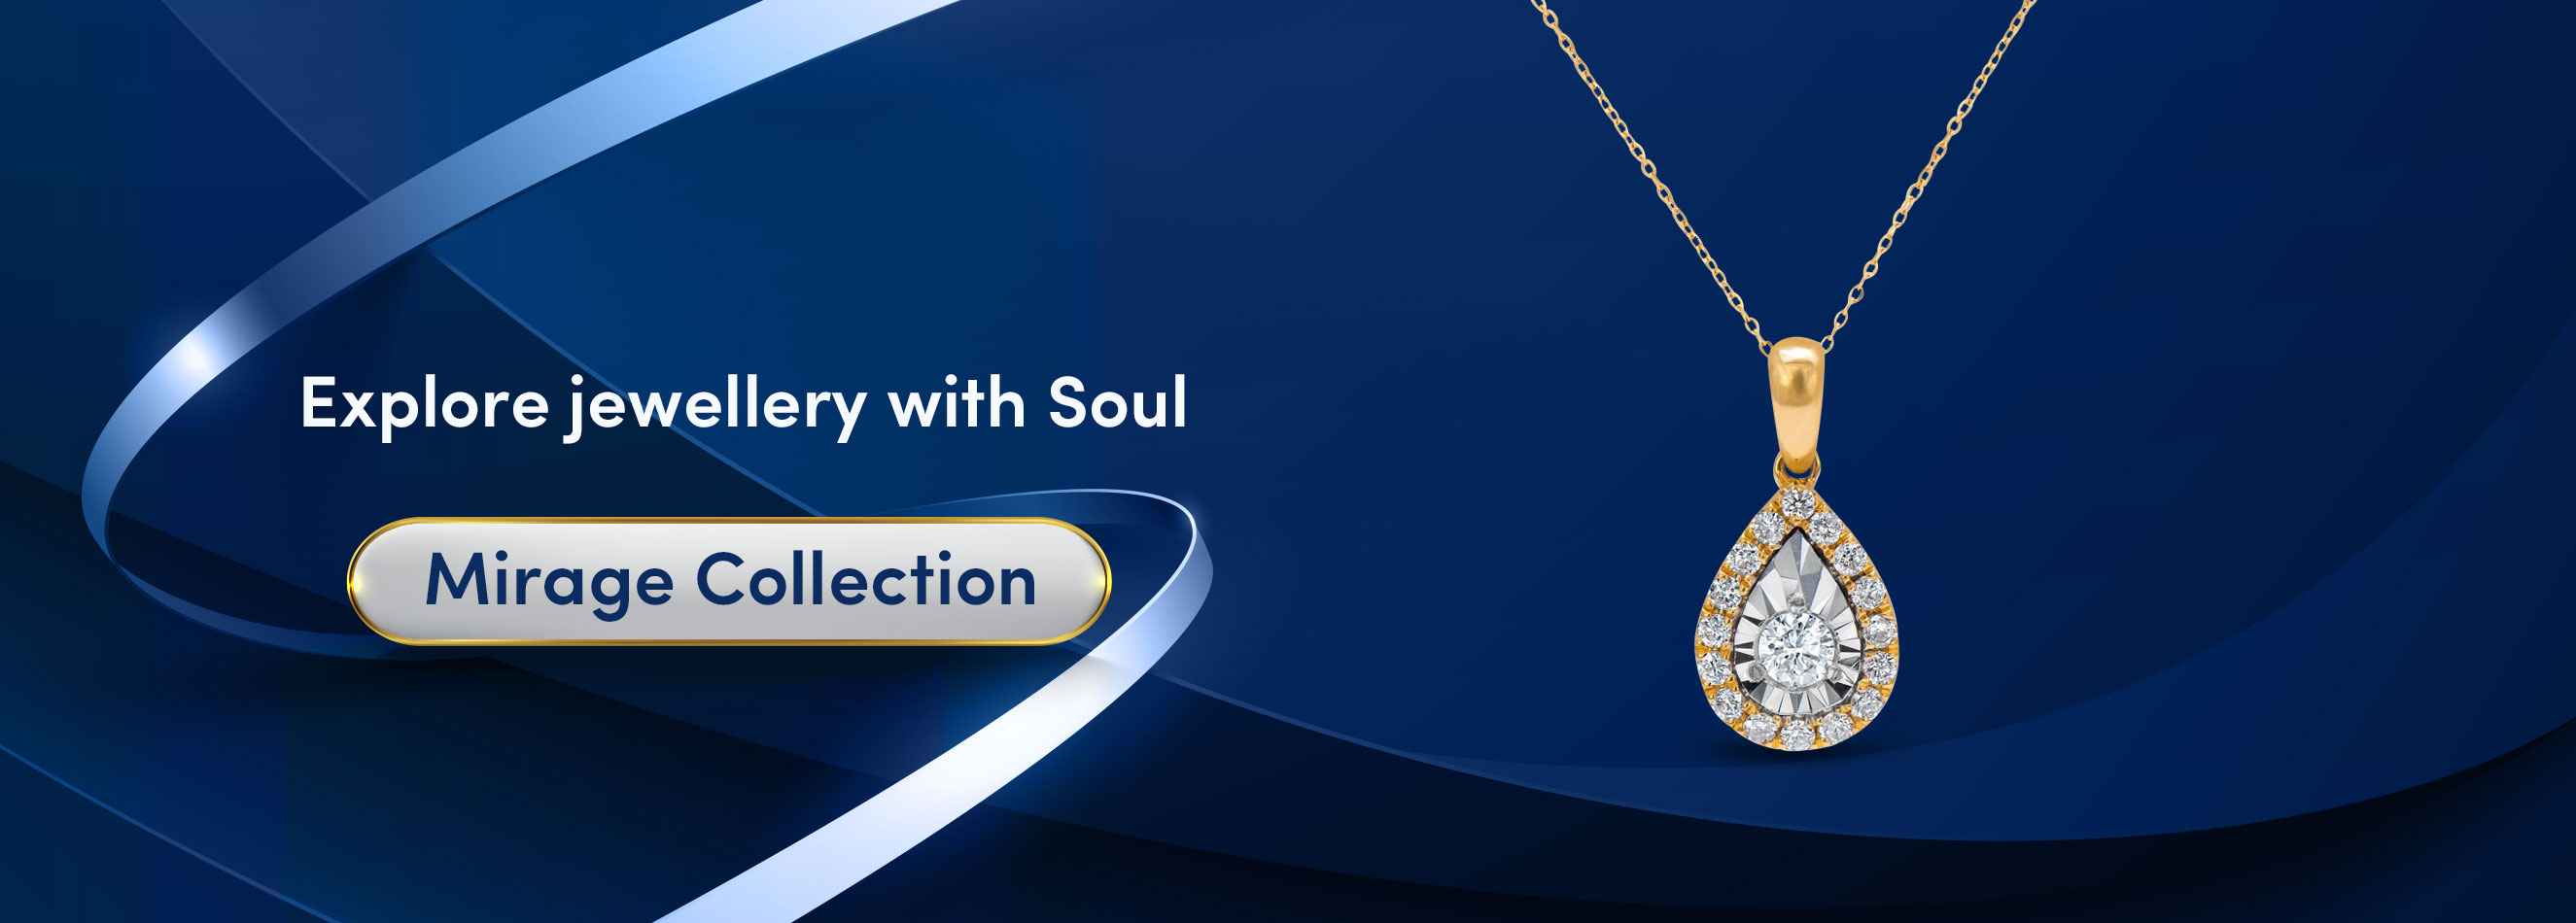 mirage Jewelry Collection Banner